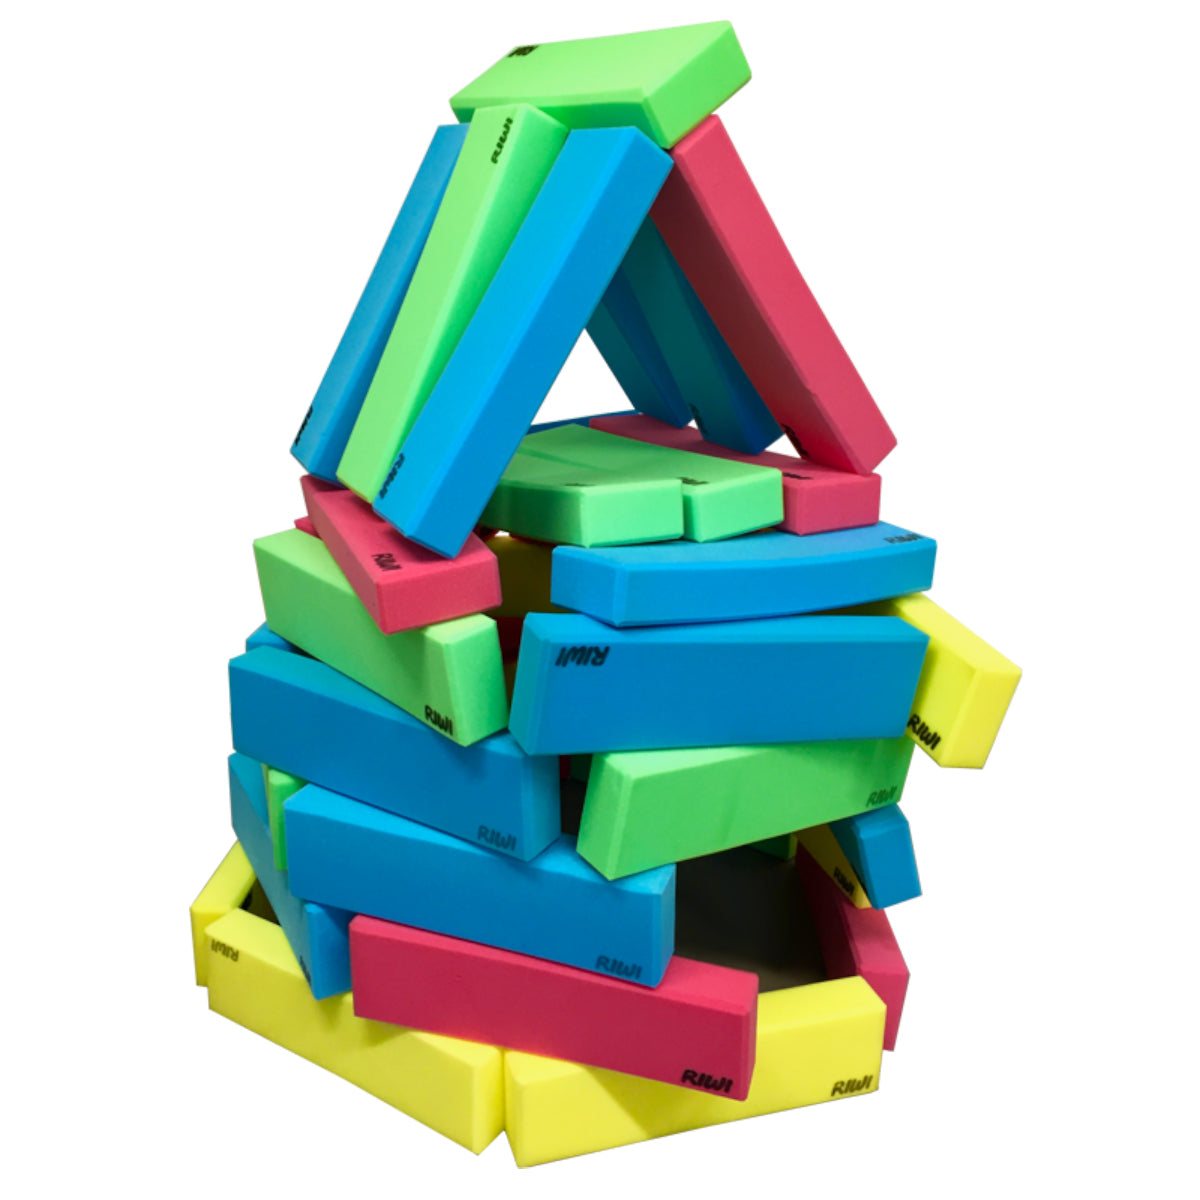 Blue foam building blocks allow kids to create structures and